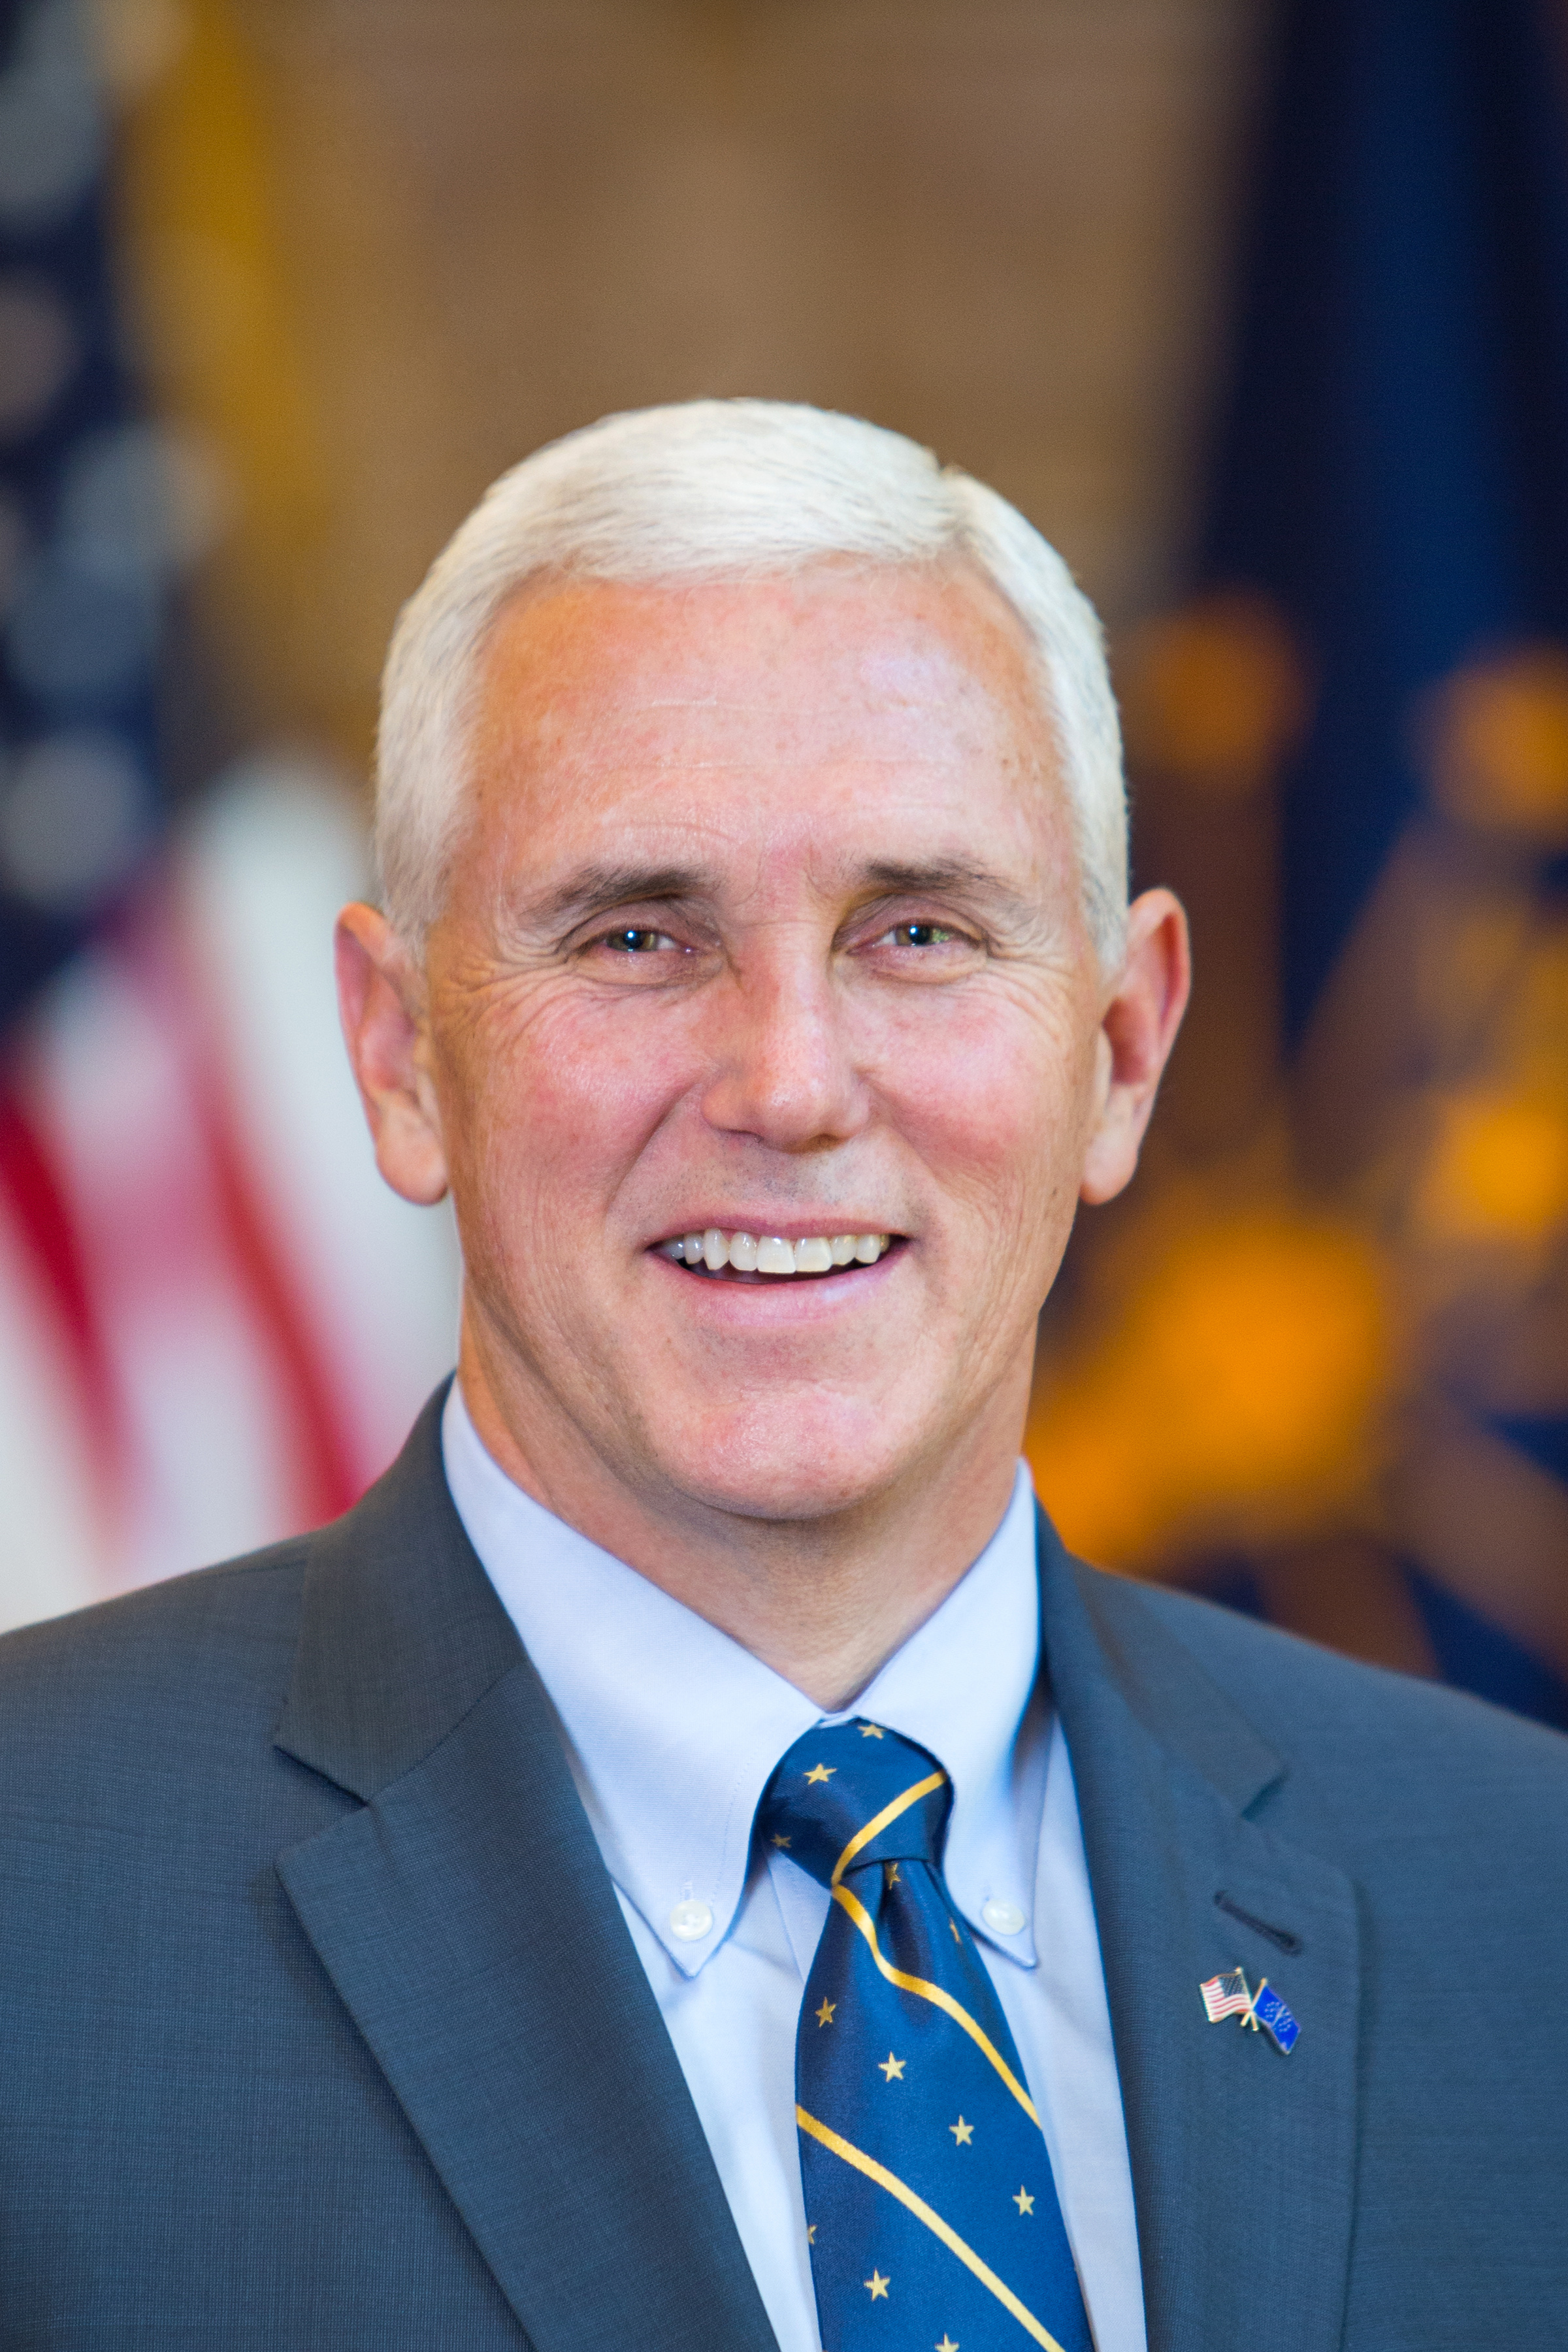 Mike Pence smiles in a blue tie and blue jacket